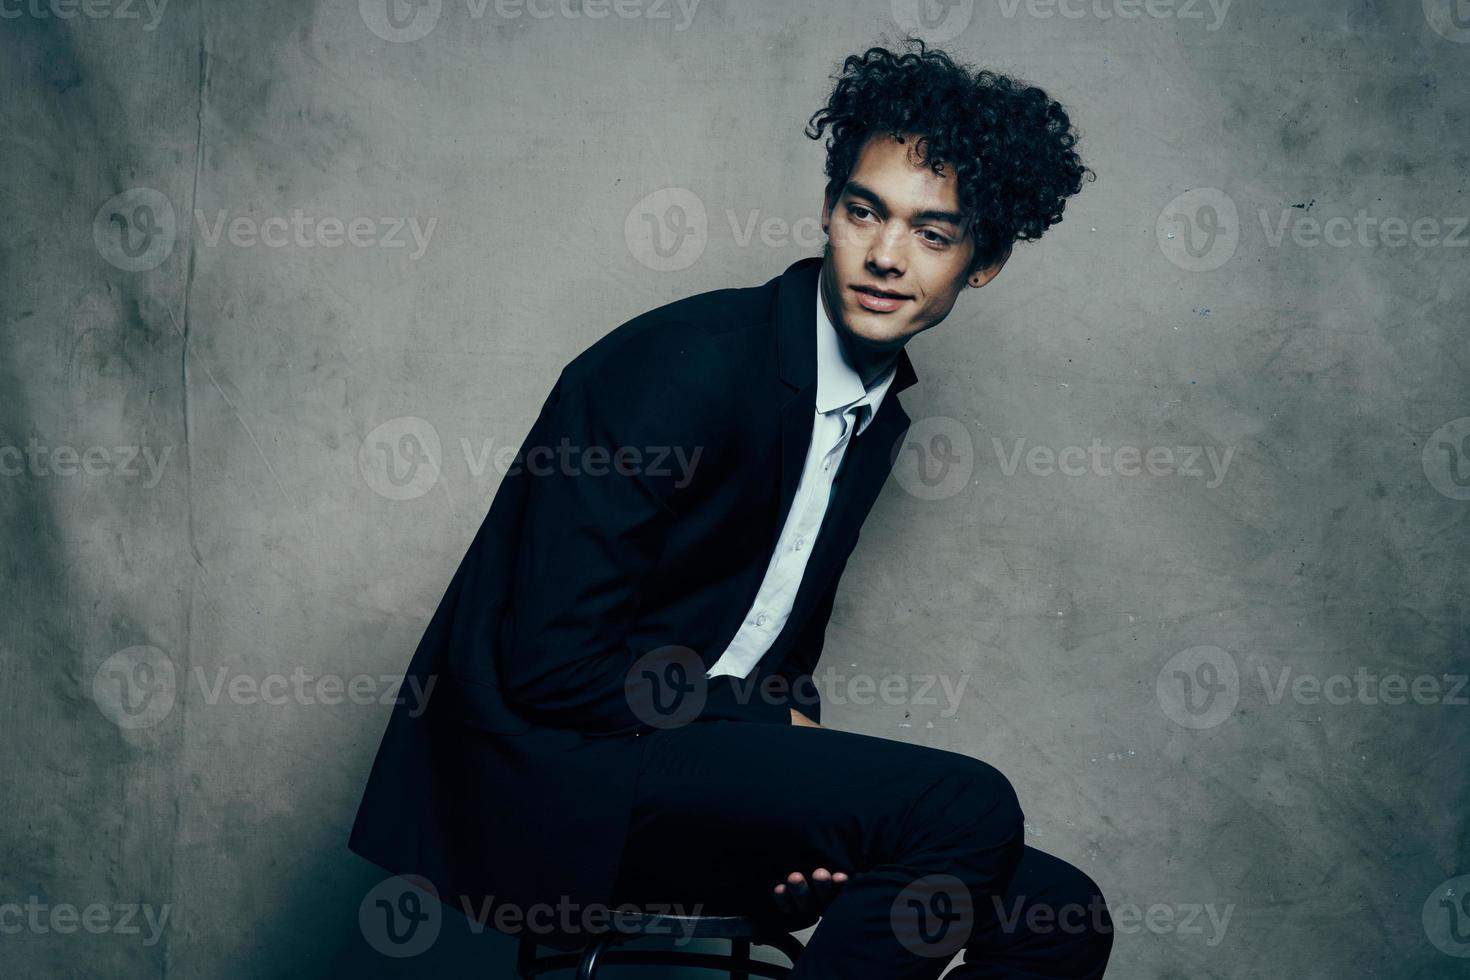 Cheerful curly-haired guy in a suit fashion business official photo